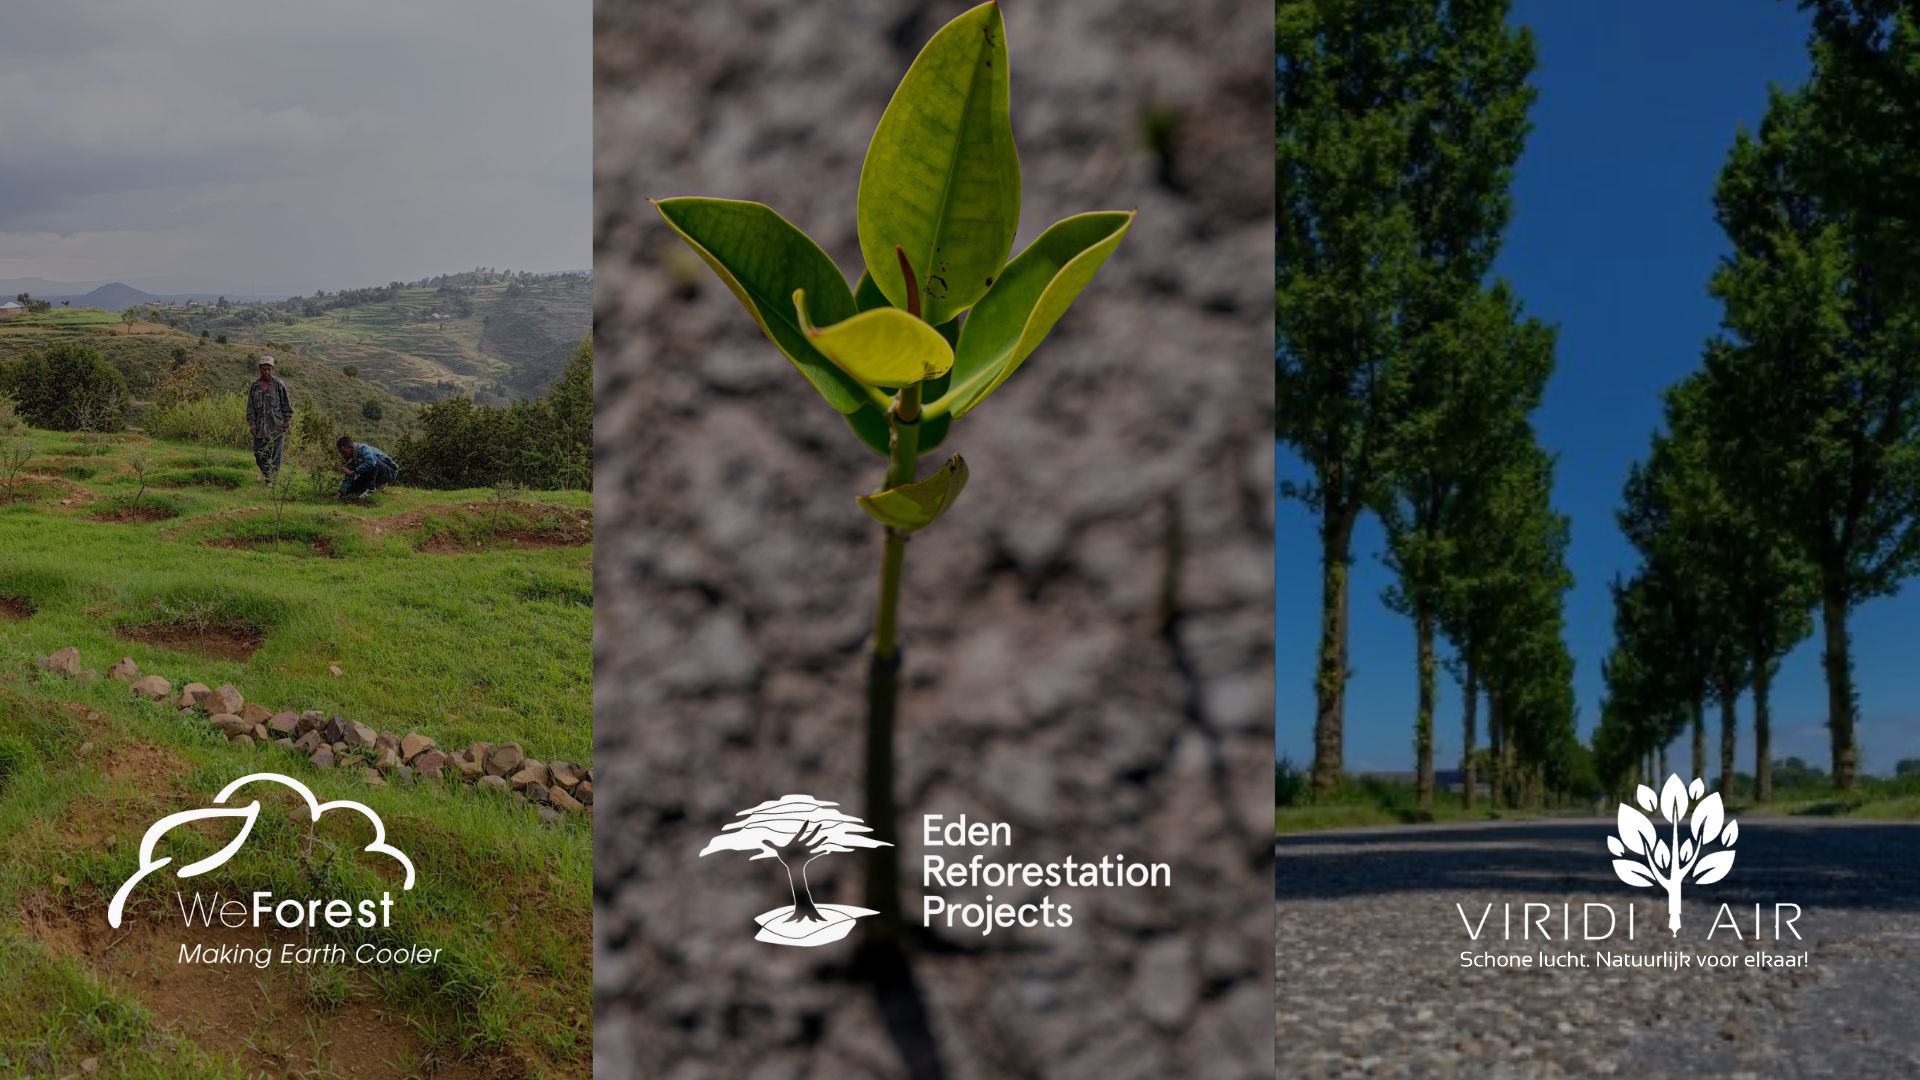 Our partners: WeForest, Eden Reforestation Projects, ViridiAir, and their planting sites